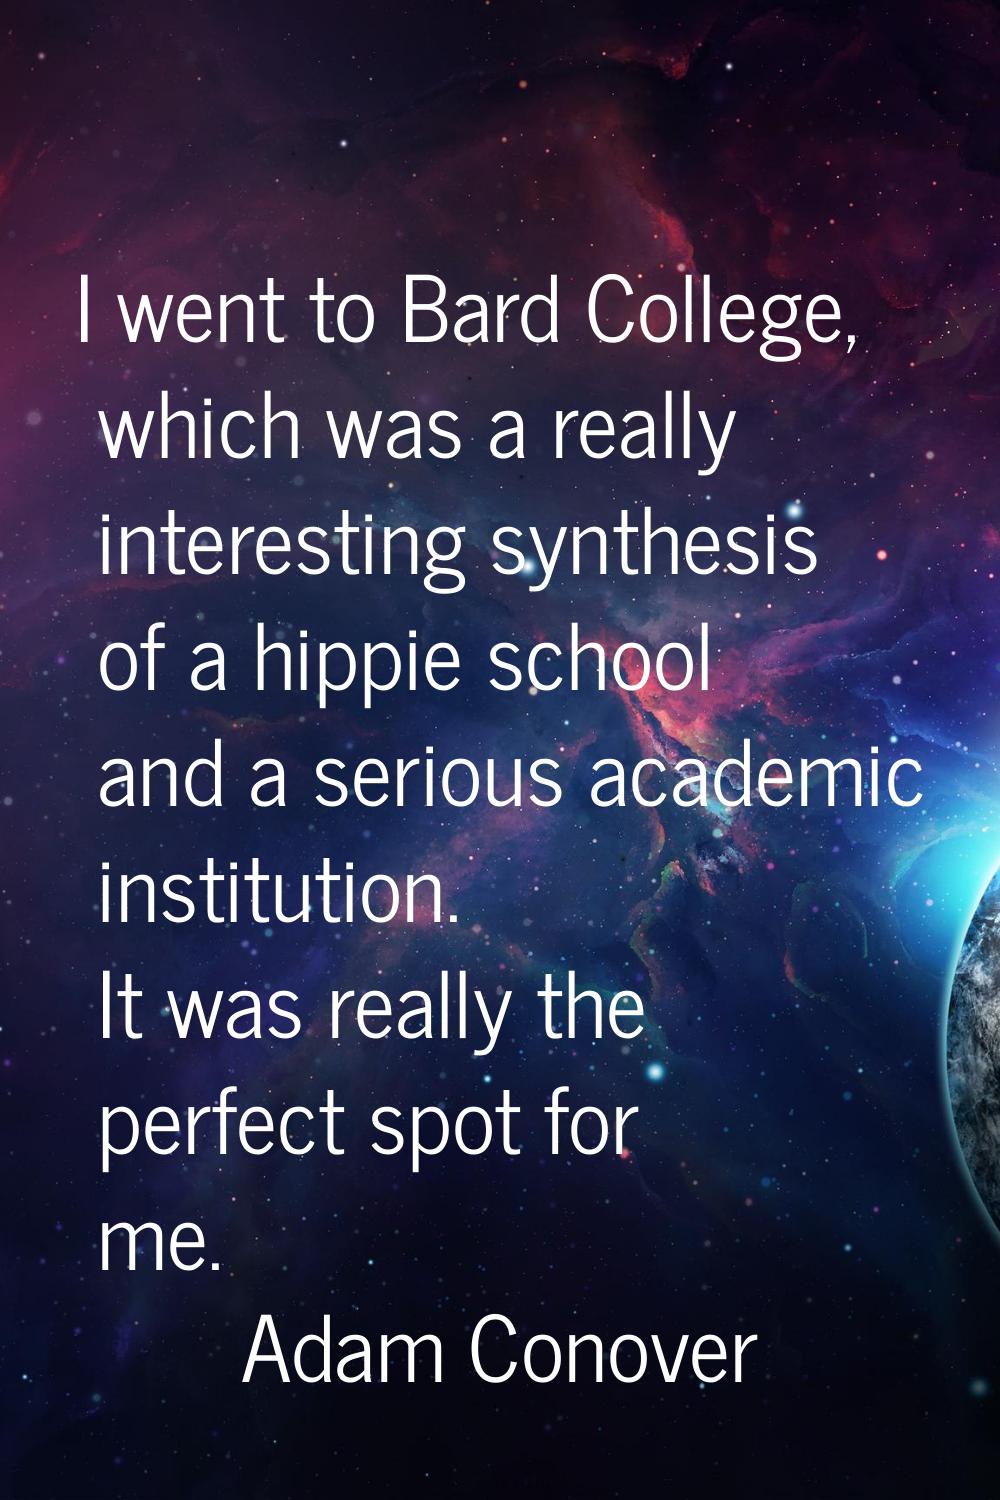 I went to Bard College, which was a really interesting synthesis of a hippie school and a serious a